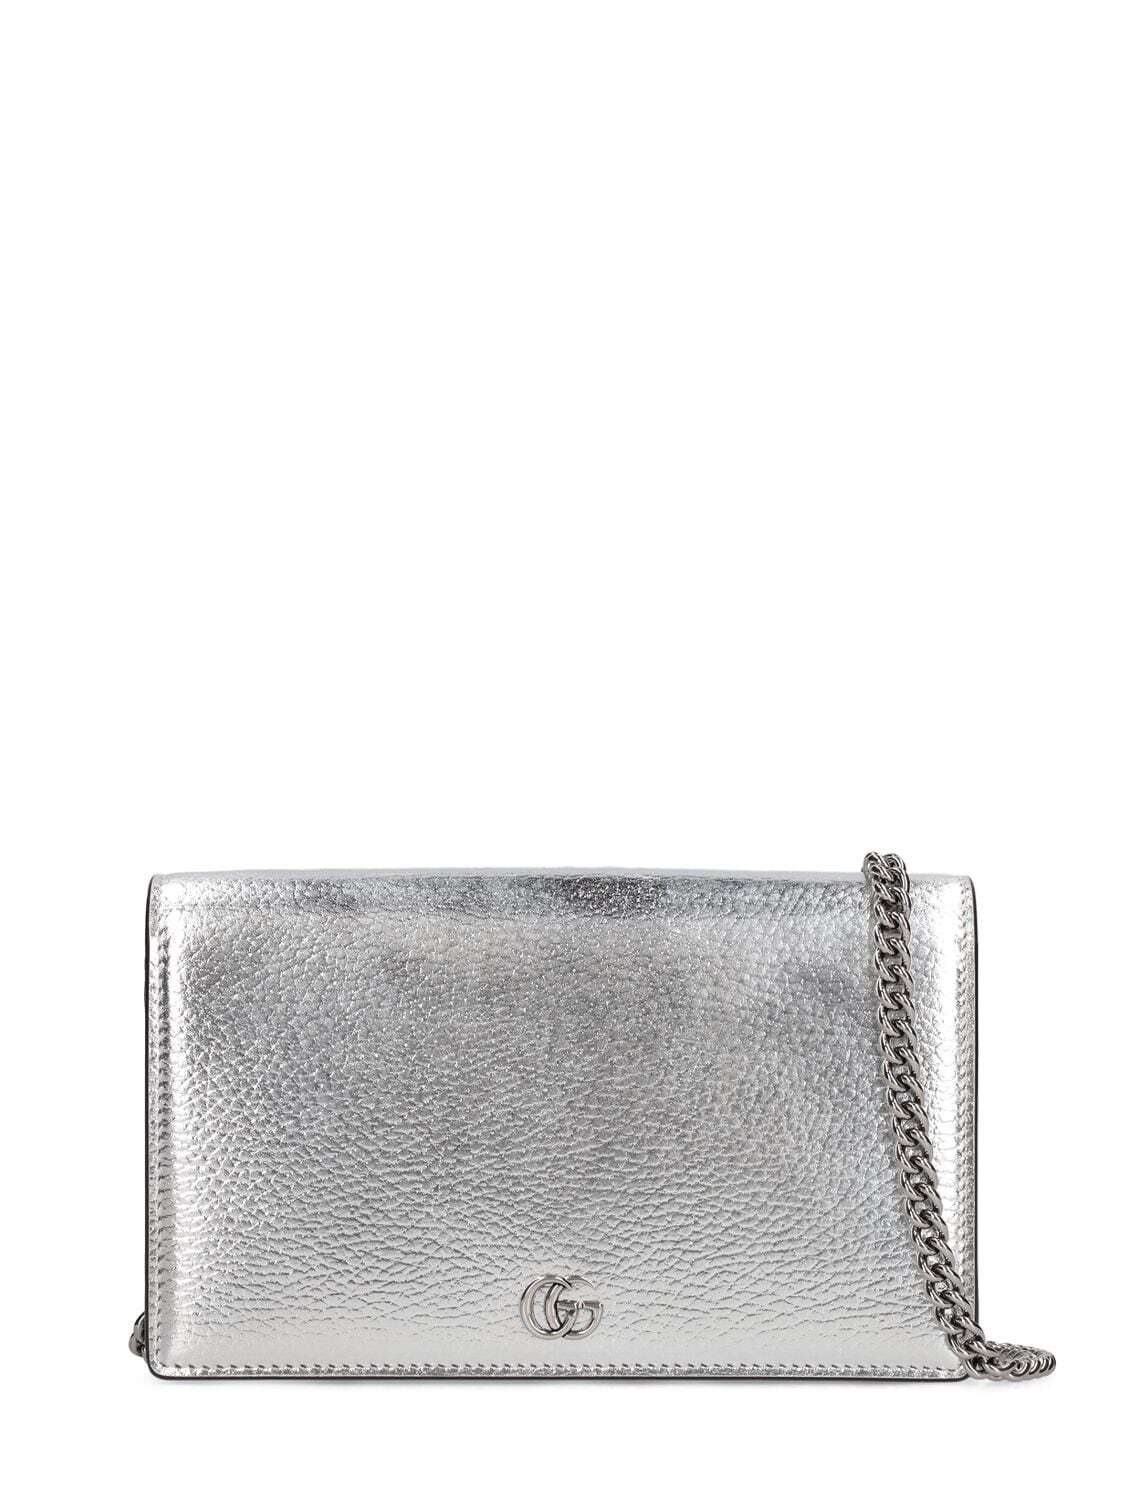 GUCCI Gg Petite Marmont Leather Bag in silver